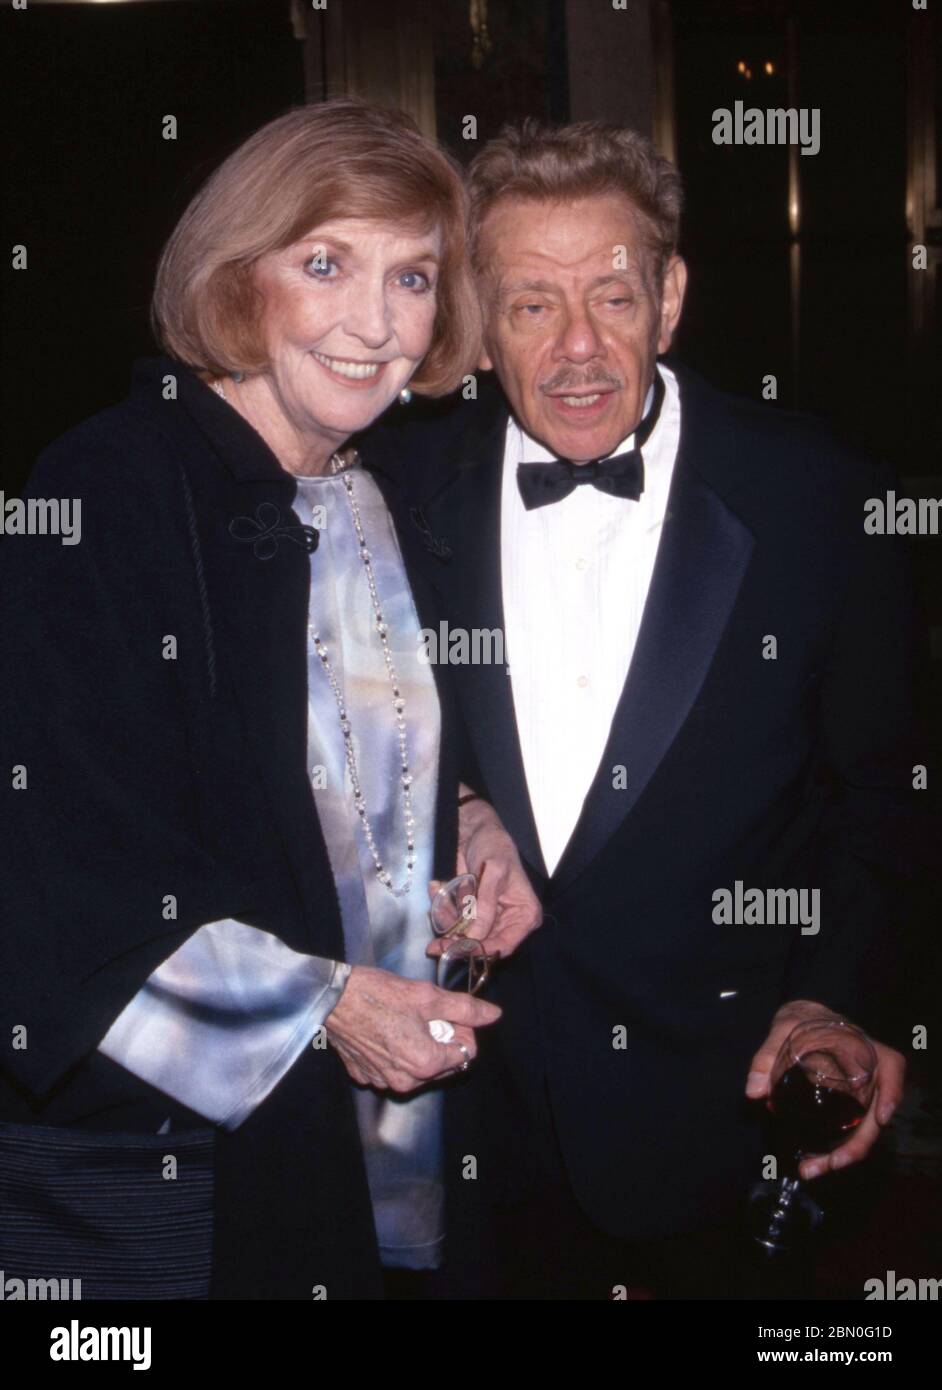 11 May 2020 - Comedy veteran Jerry Stiller has died at the age of 92. Jerry Stiller was known for his role as Frank Costanza in the show ''Seinfeld'' and later, as Arthur Spooner in the sitcom, ''The King of Queens.''.Stiller had lost his wife, Anne Meara, in 2015. File photo:FILE PHOTO: Anne Meara and Jerry Stiller attend 'A Broadway Frolic' A benefit for the National Actors Theater at the Plaza Hotel on 10/19/1998 in New York City. (Credit Image: © Mcbride/AdMedia via ZUMA Wire) Stock Photo